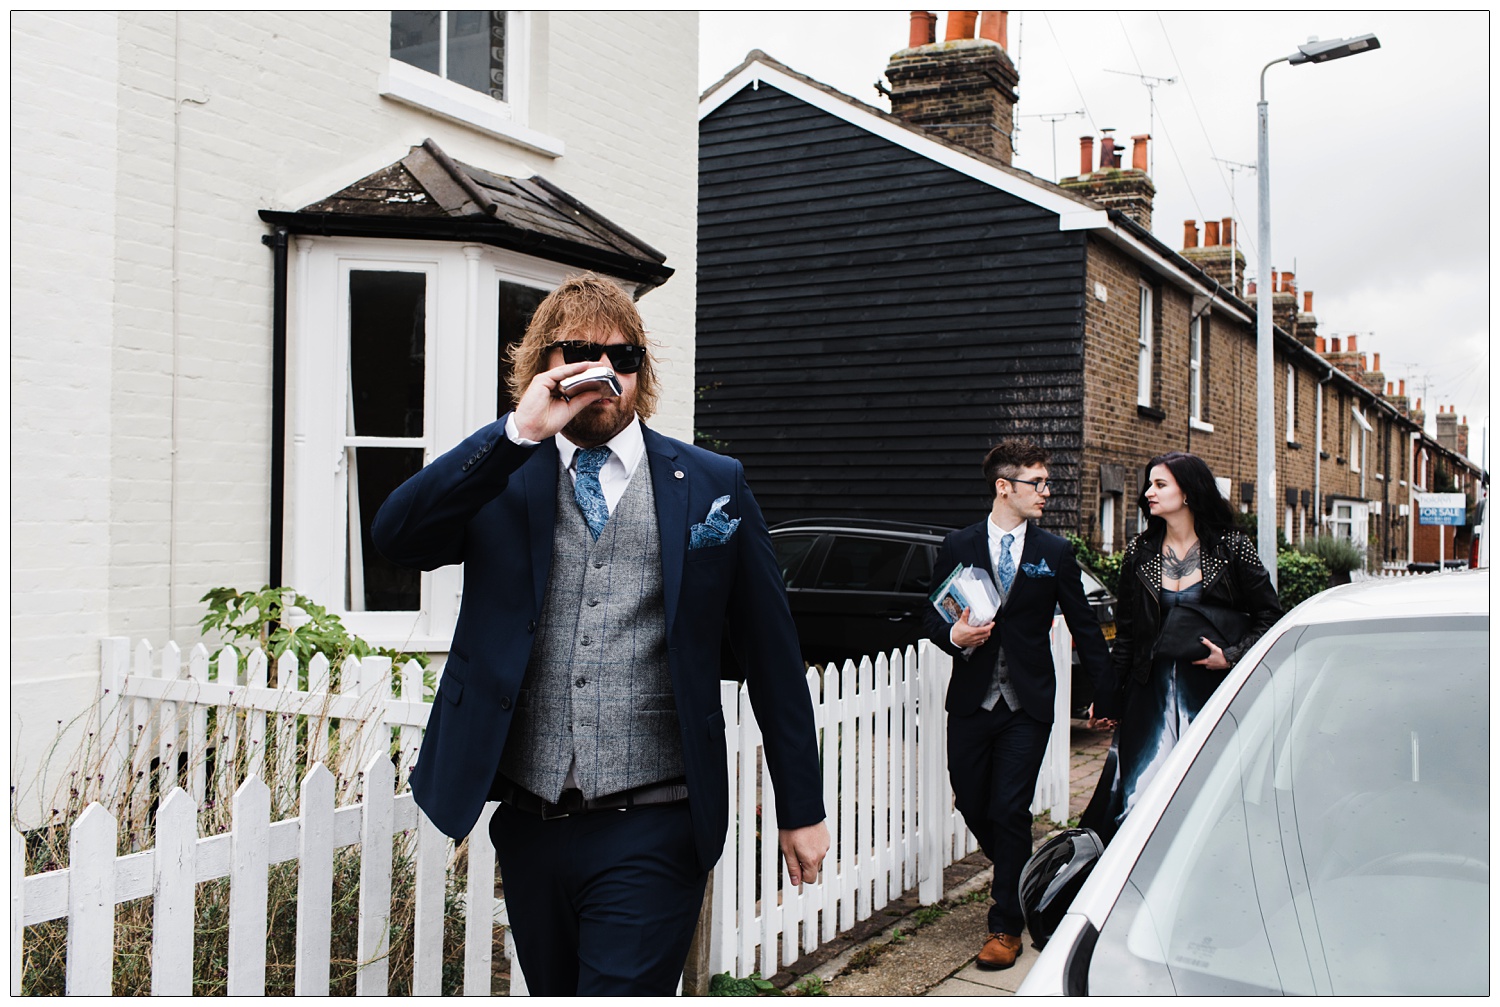 Man takes a drink from a hip flask as he walks along the street to a wedding in Maldon. Two guests are behind him.